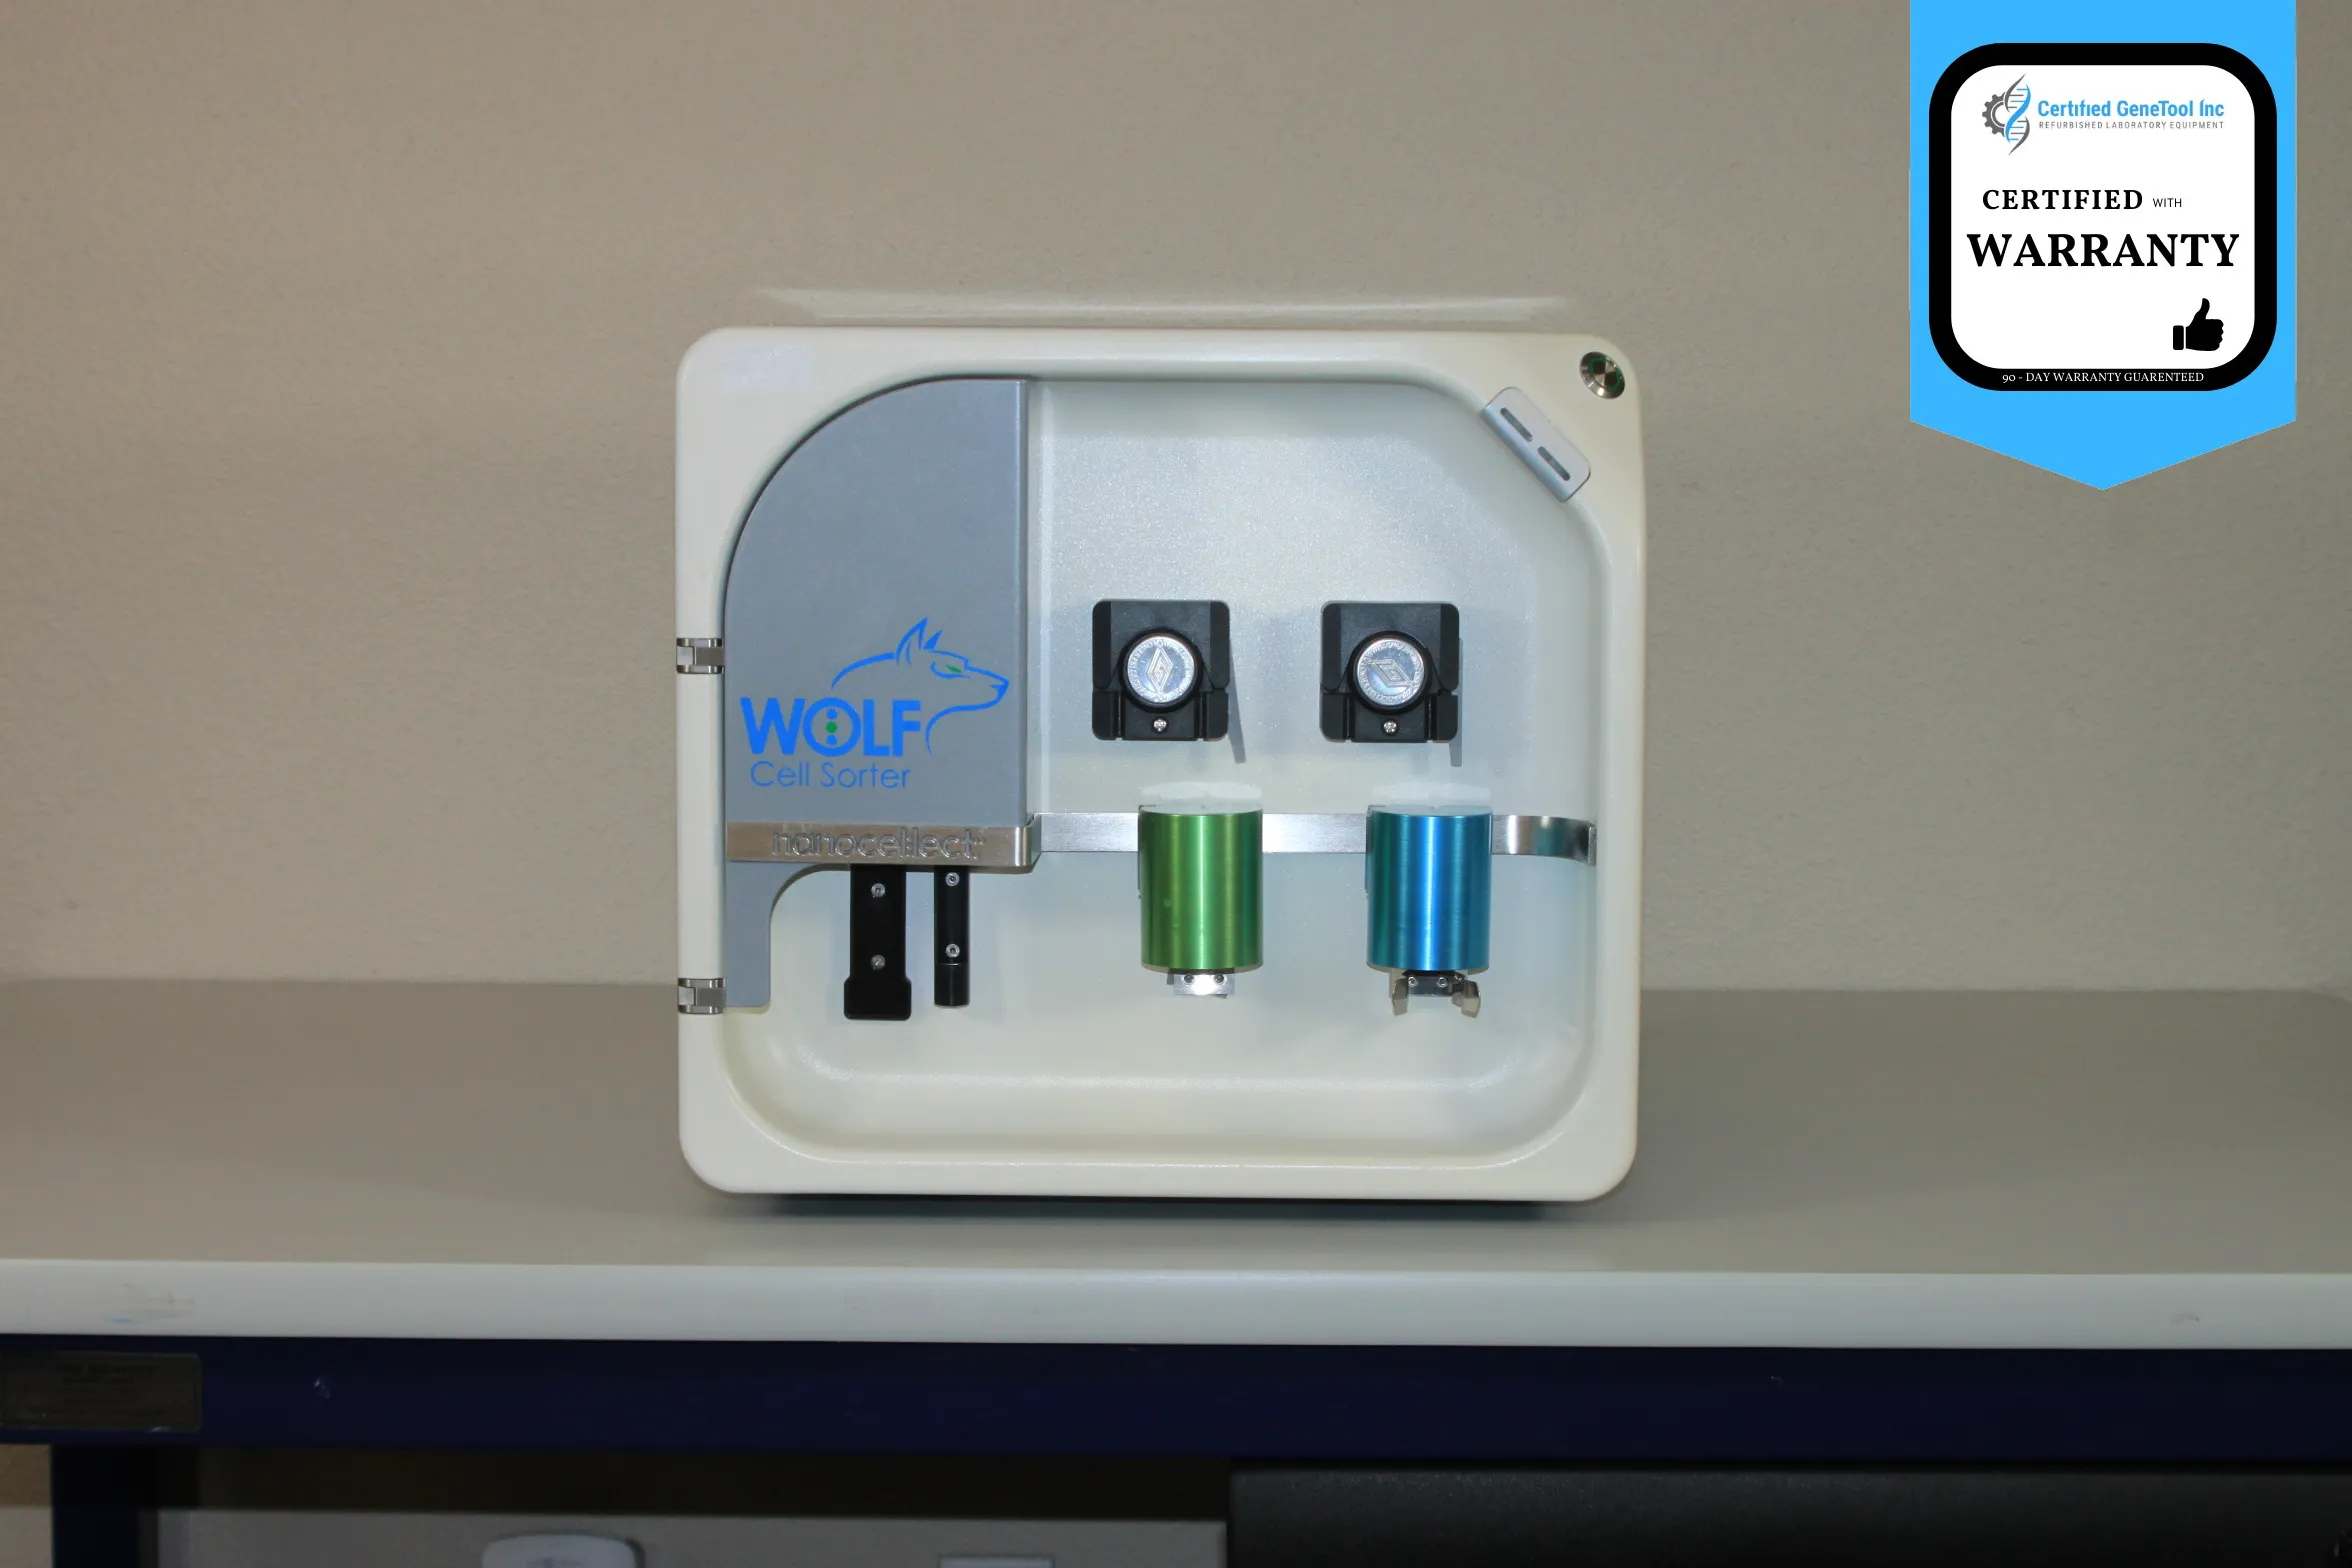 NanoCellect Wolf Cell Sorter - Certified with Warranty